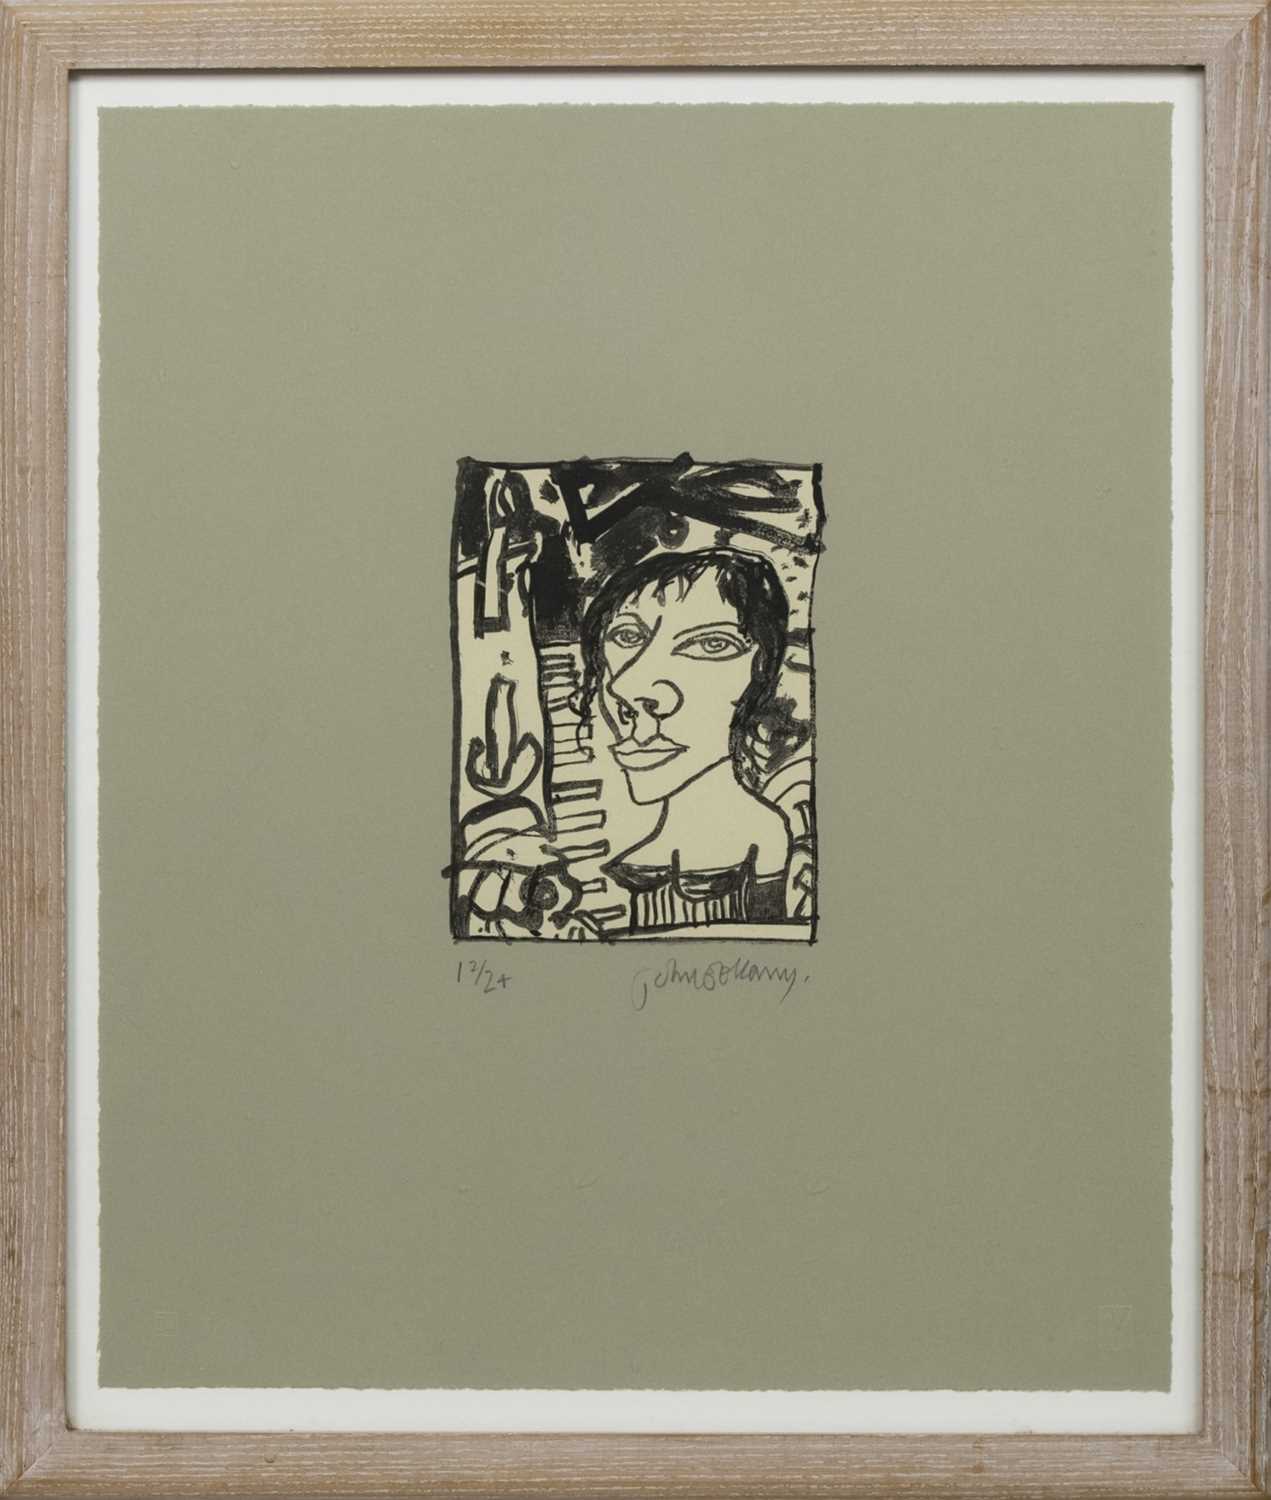 Lot 7 - THE PIANO PLAYER, A LITHOGRAPH BY JOHN BELLANY